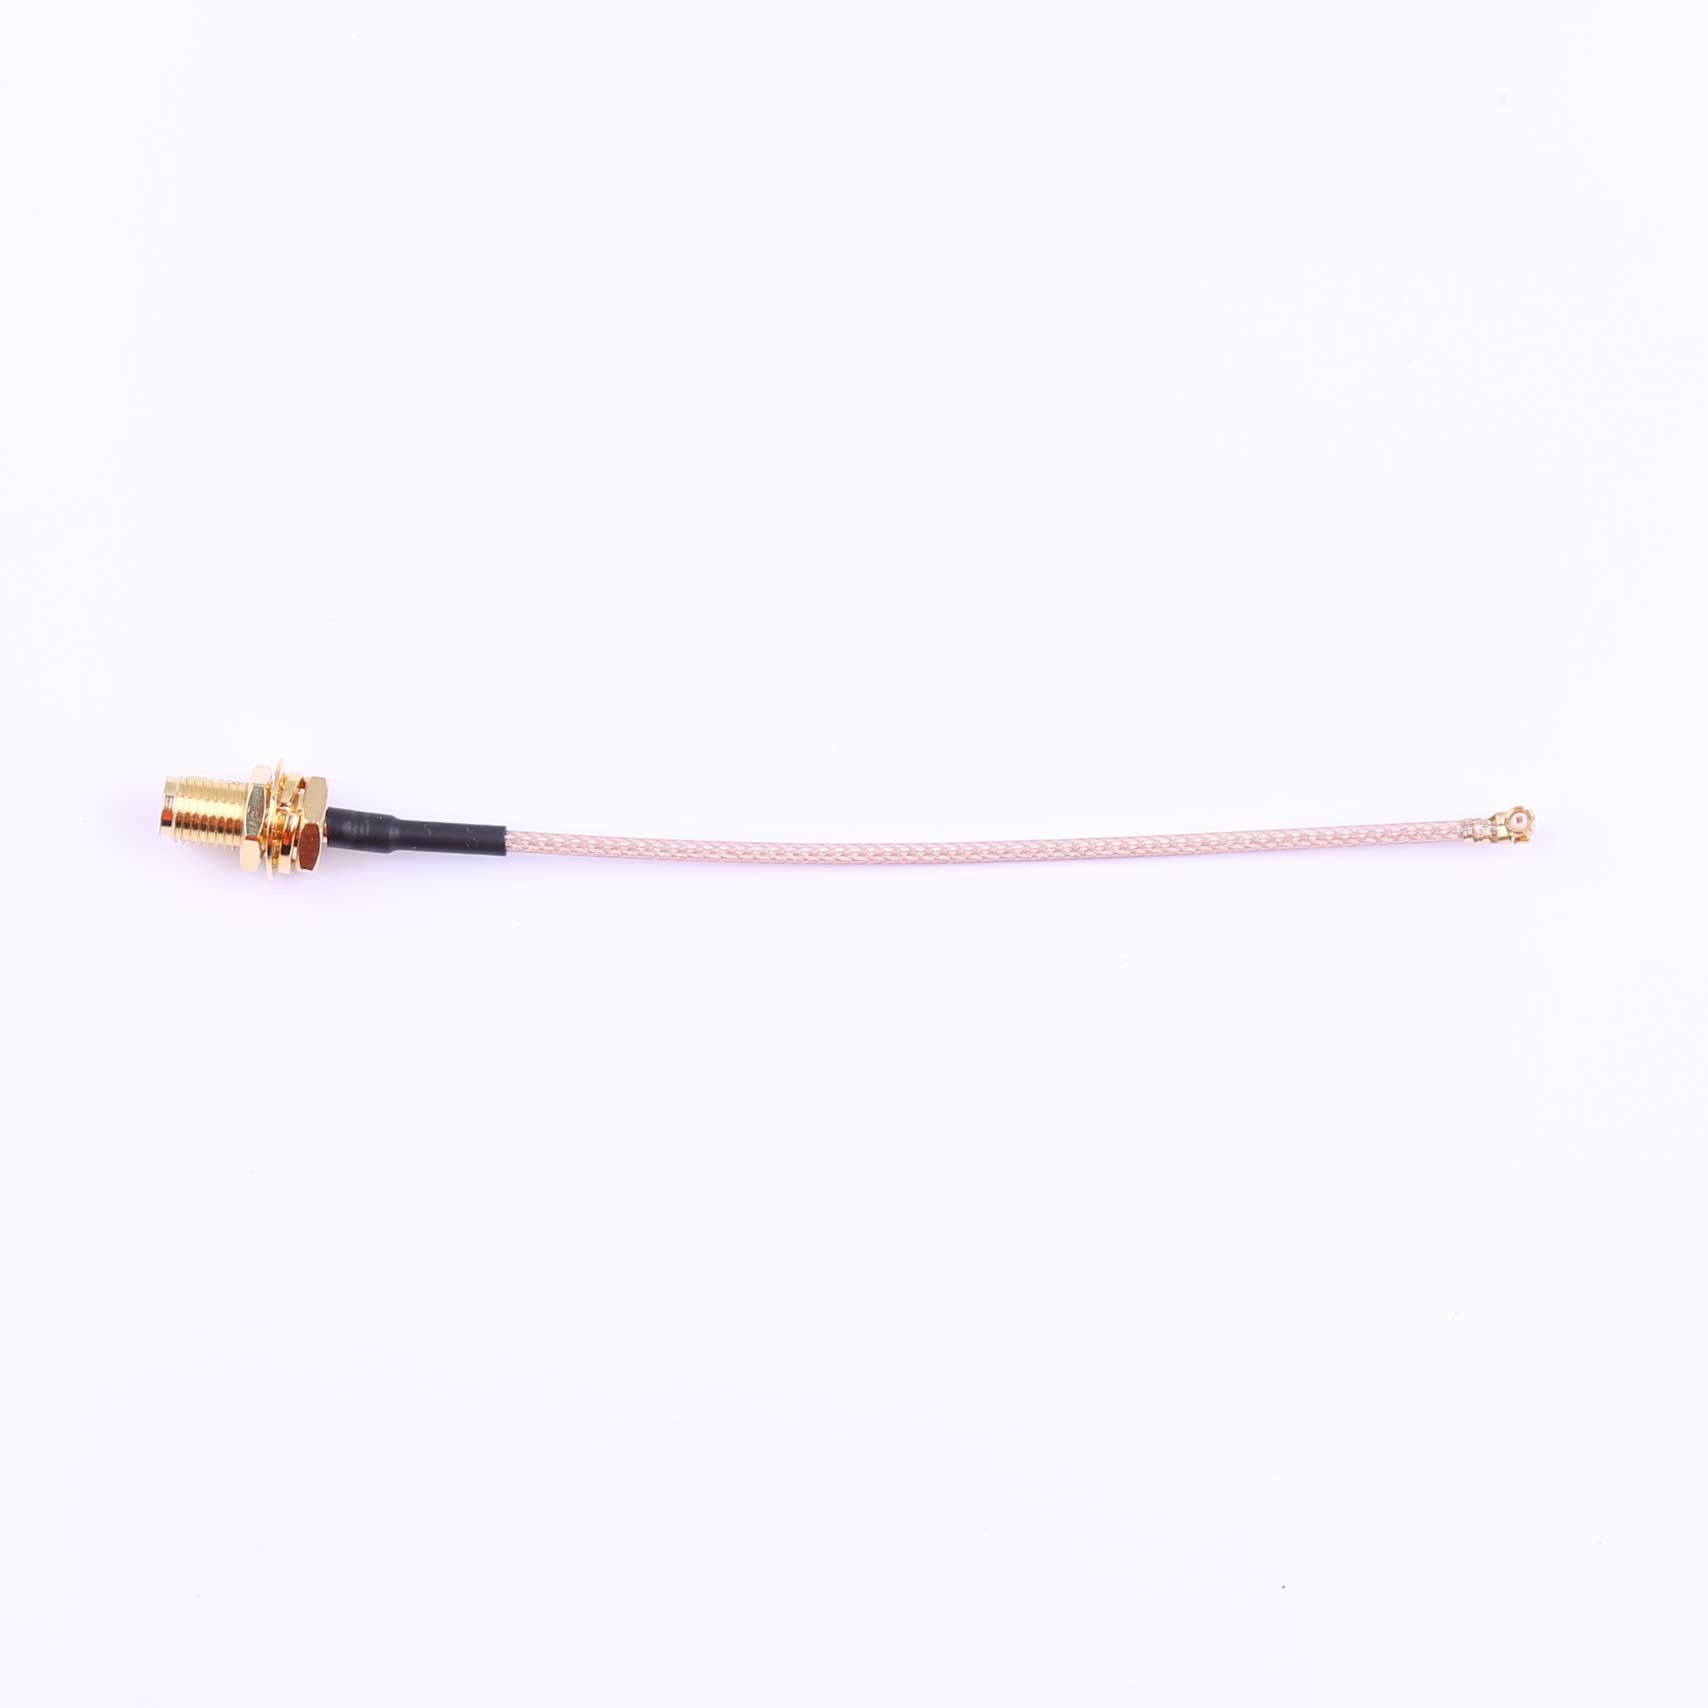 Kinghelm Coaxial connector Rotor RF, IPEX to SMA gold-plated external thread inner hole, RG178, L 100mm, four-piece set - KHB (RG178) -100-28